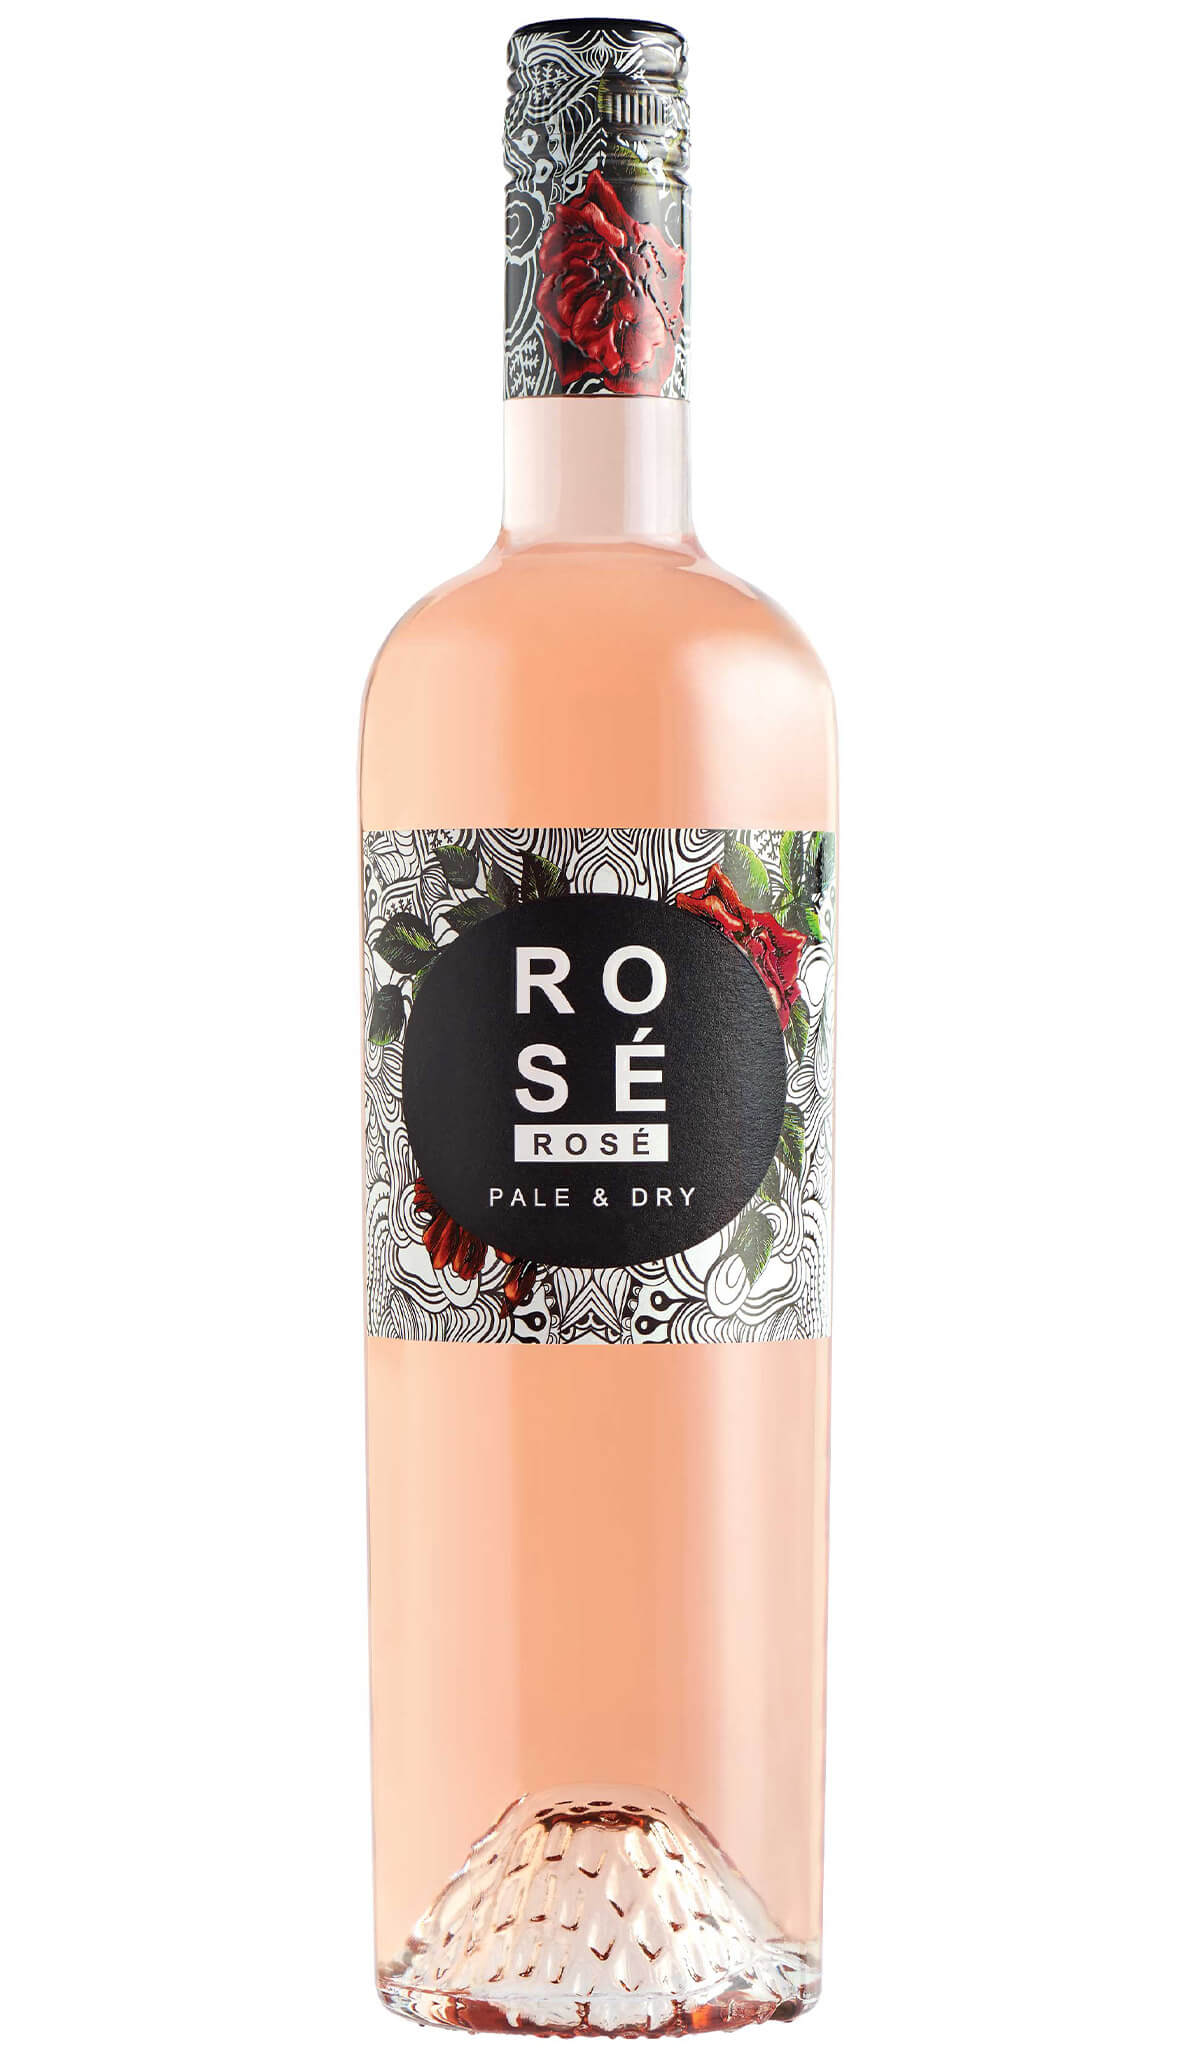 Find out more or buy De Bortoli Pale & Dry Rosé Rosé 2023 (King Valley) online at Wine Sellers Direct - Australia’s independent liquor specialists.